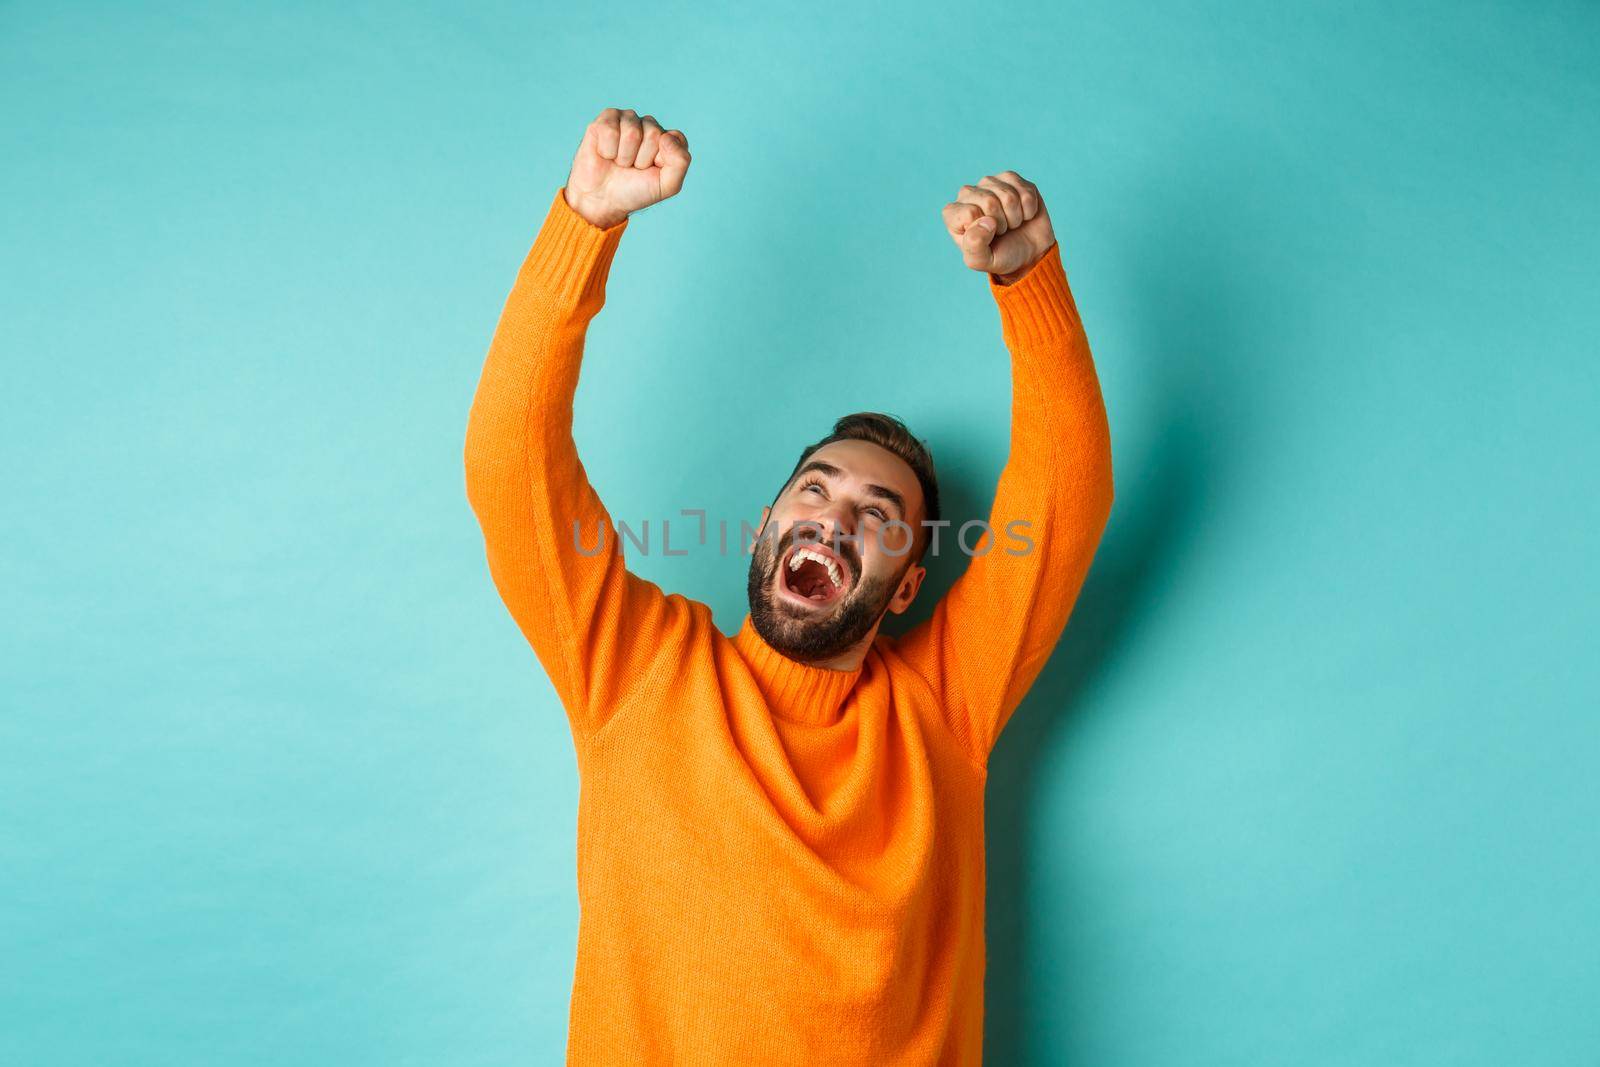 Happy man triumphing and feeling rejoice of winning, celebrating victory, standing over light blue background. Copy space